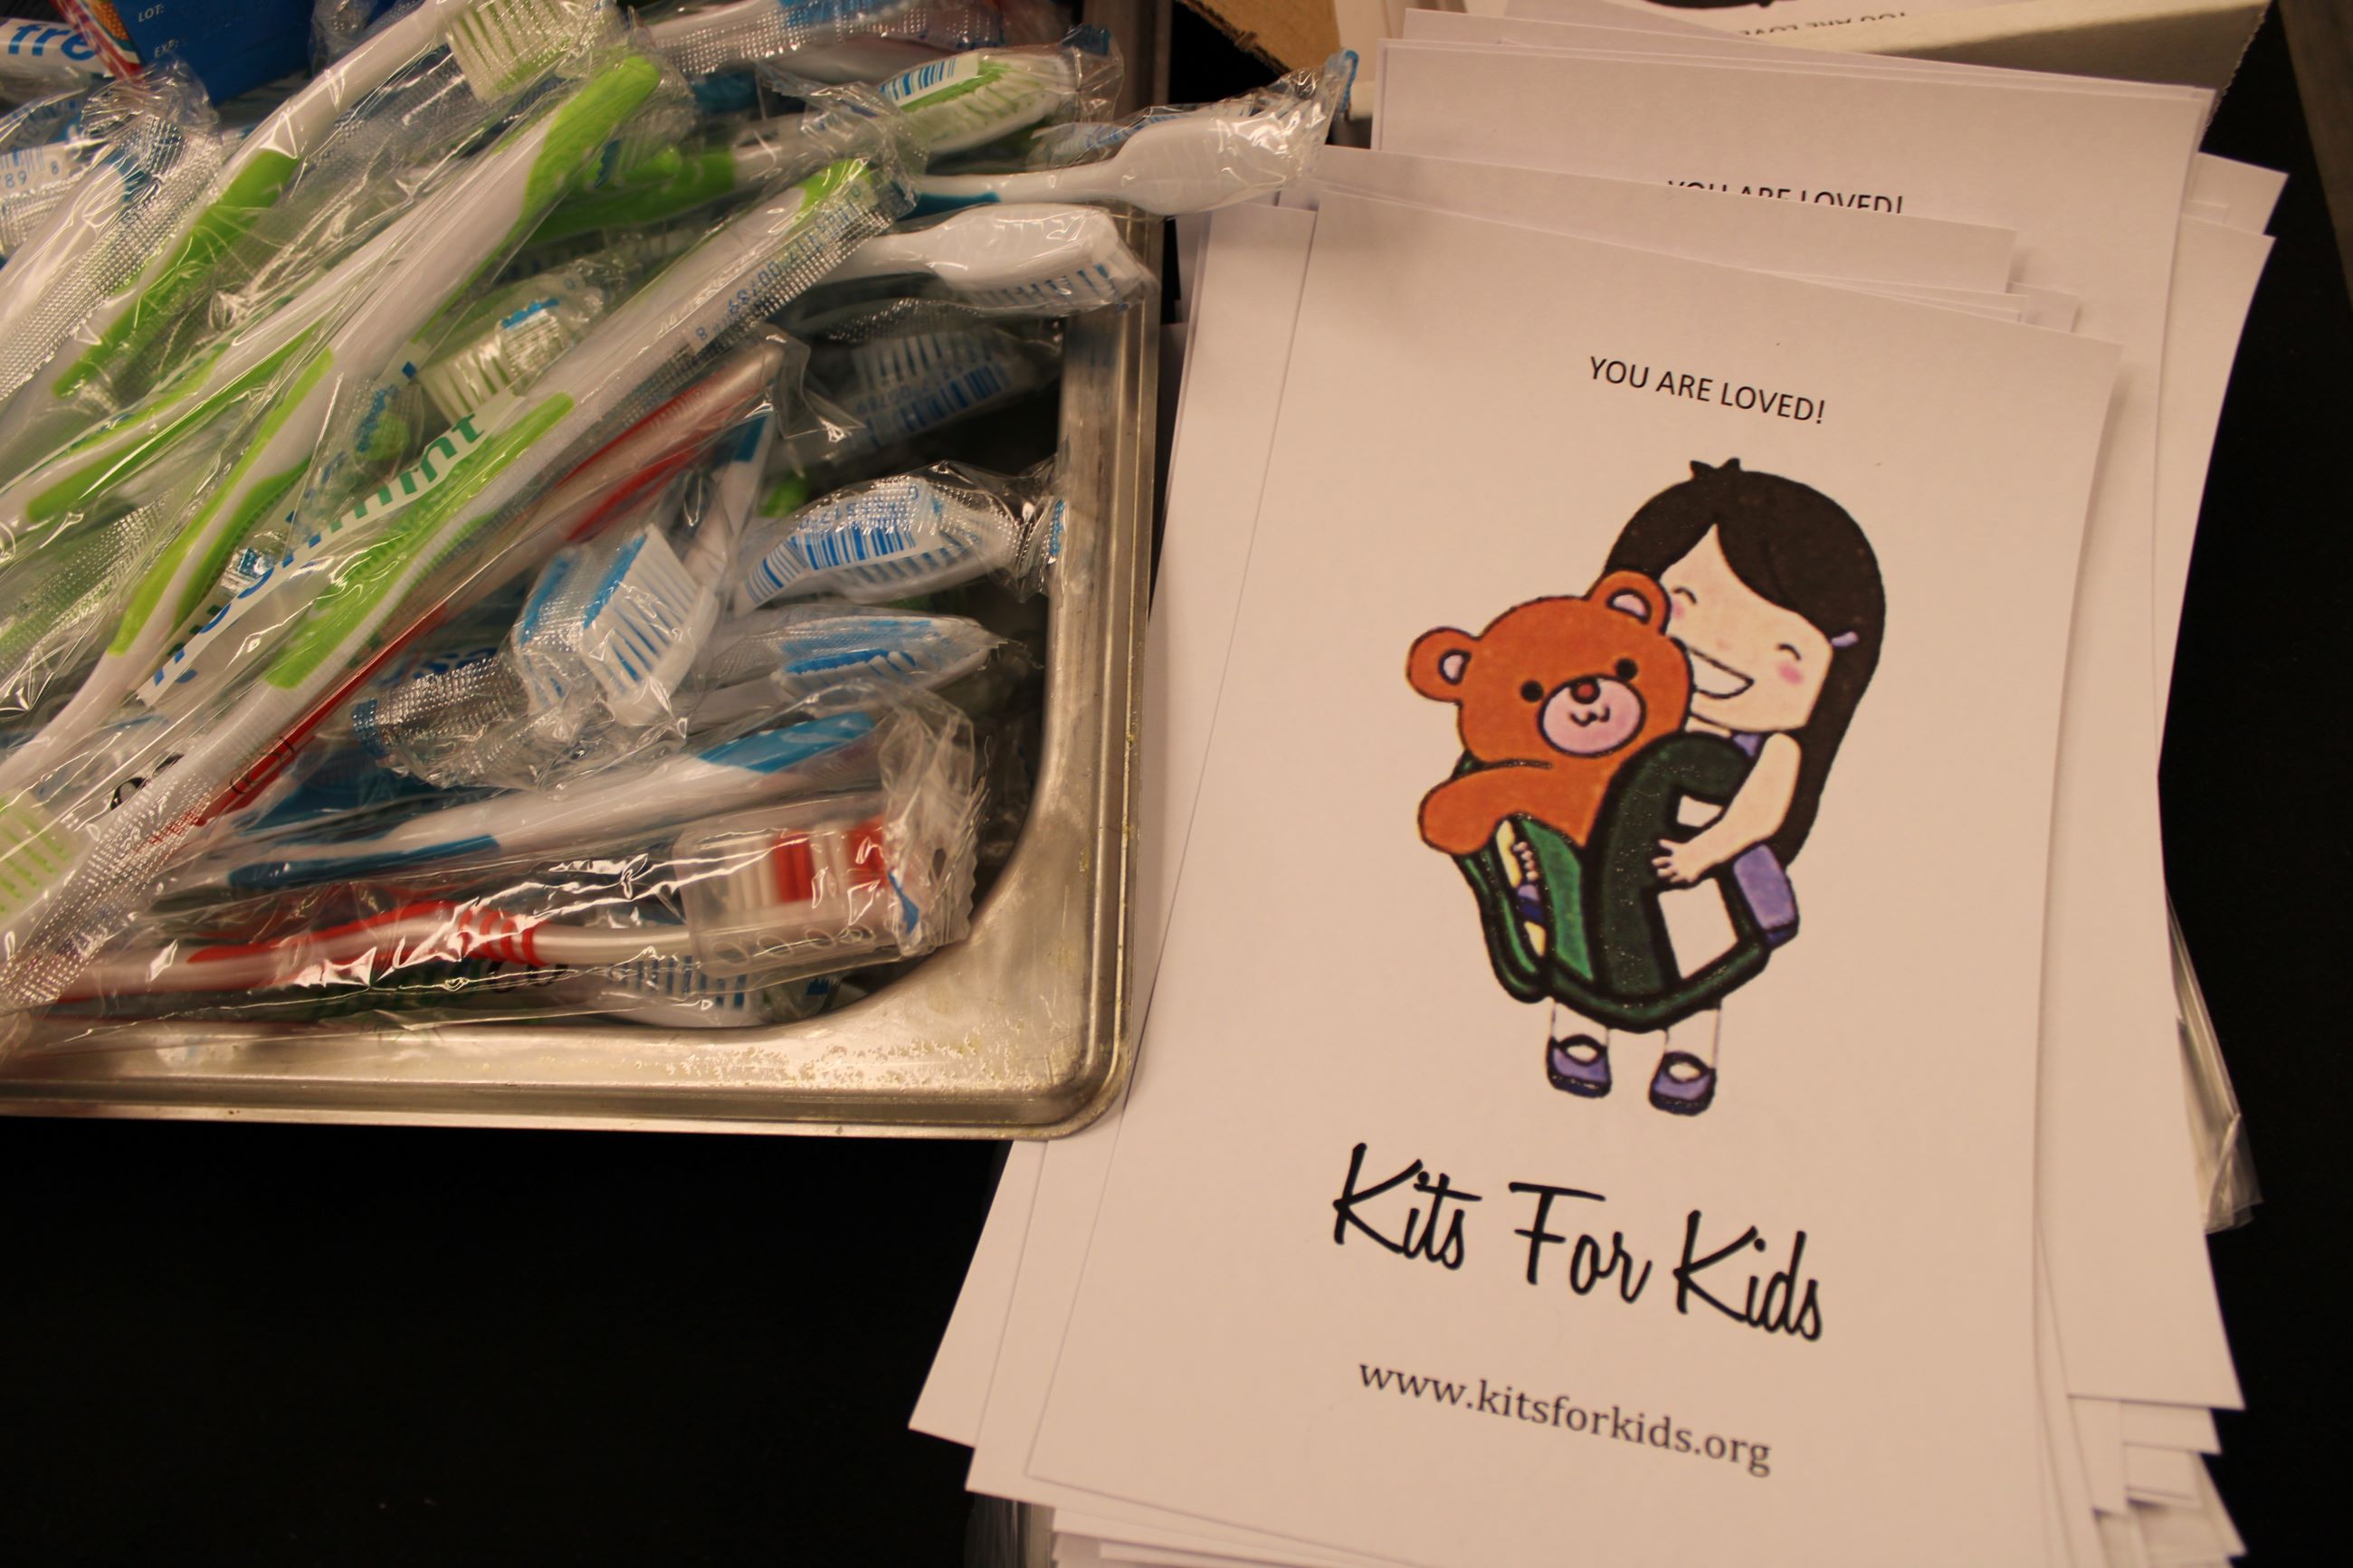 Kits for Kids helps assemble a brighter holiday